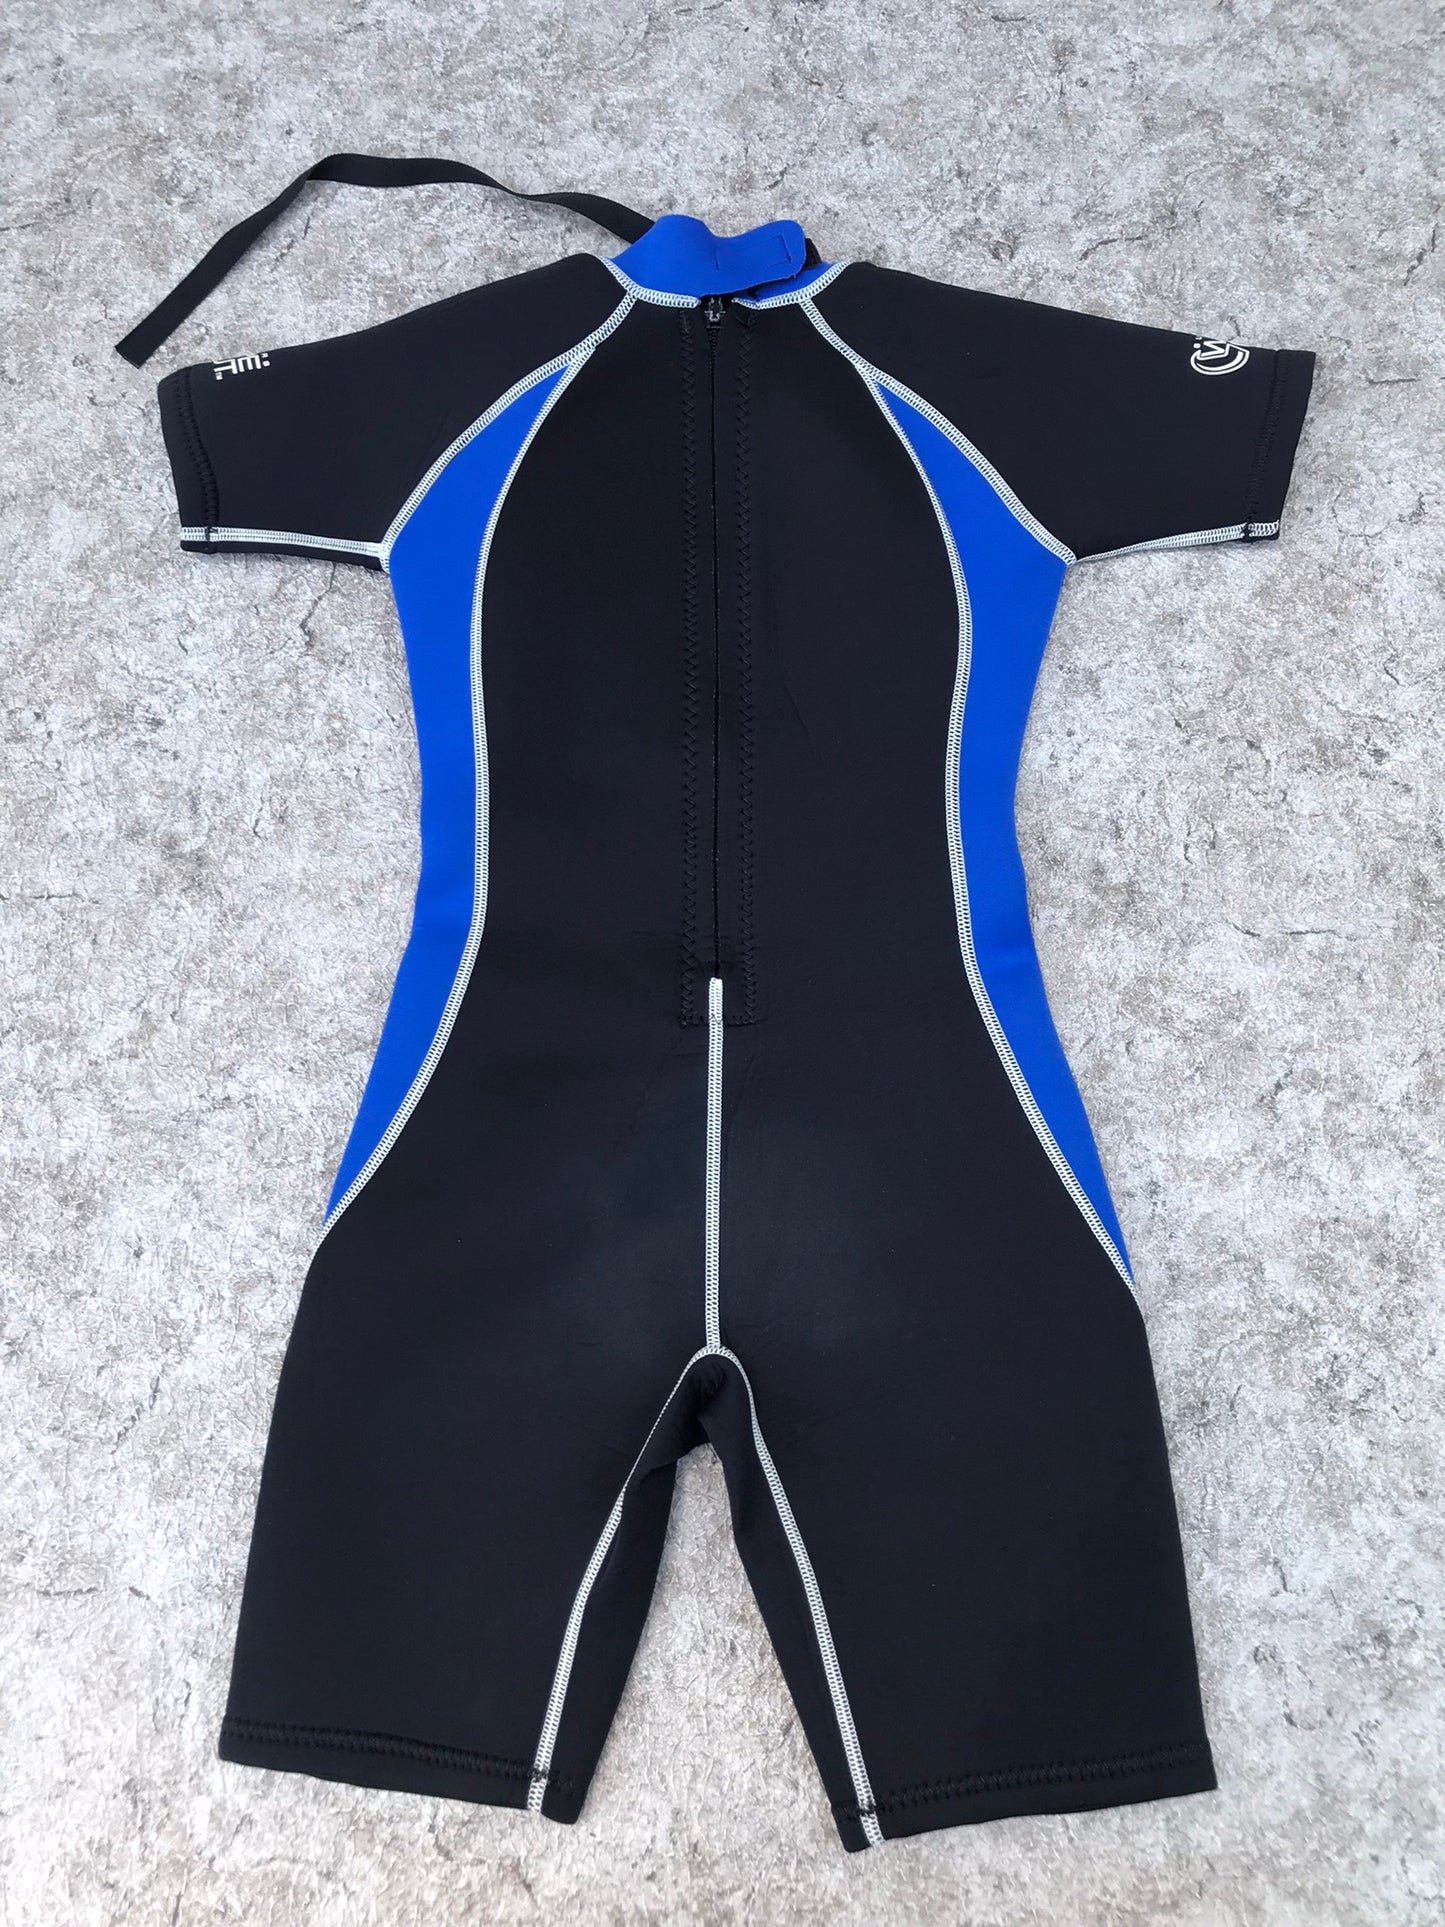 Wetsuit Child Size 7-9 Wipeout Black Blue 2-3 mm Neoprene New Demo Model